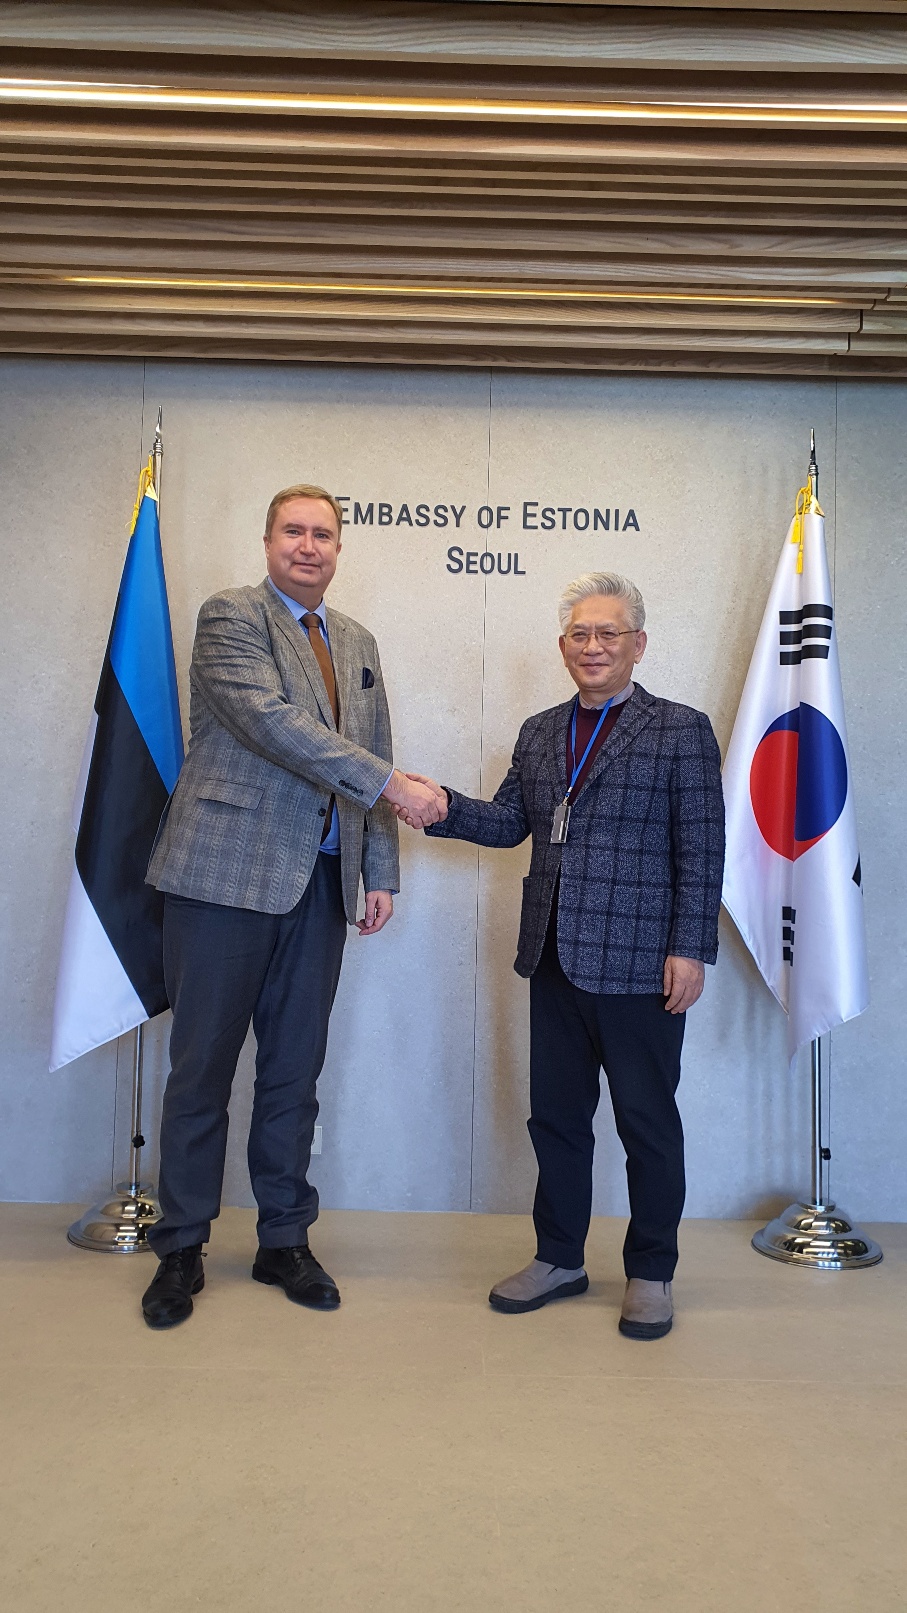 On January 27, a meeting was held between Marti Matas, deputy head of the Embassy of Estonia in Korea, and Soo-Yun Song, vice president of ODIN Energy, to discuss the ways to transfer ODIN technology to Estonia. The deputy head appreciated ODIN technology and promised to introduce positively ODIN to the Estonian government and enterprises for fruitful results.(2023.01.27) 이미지